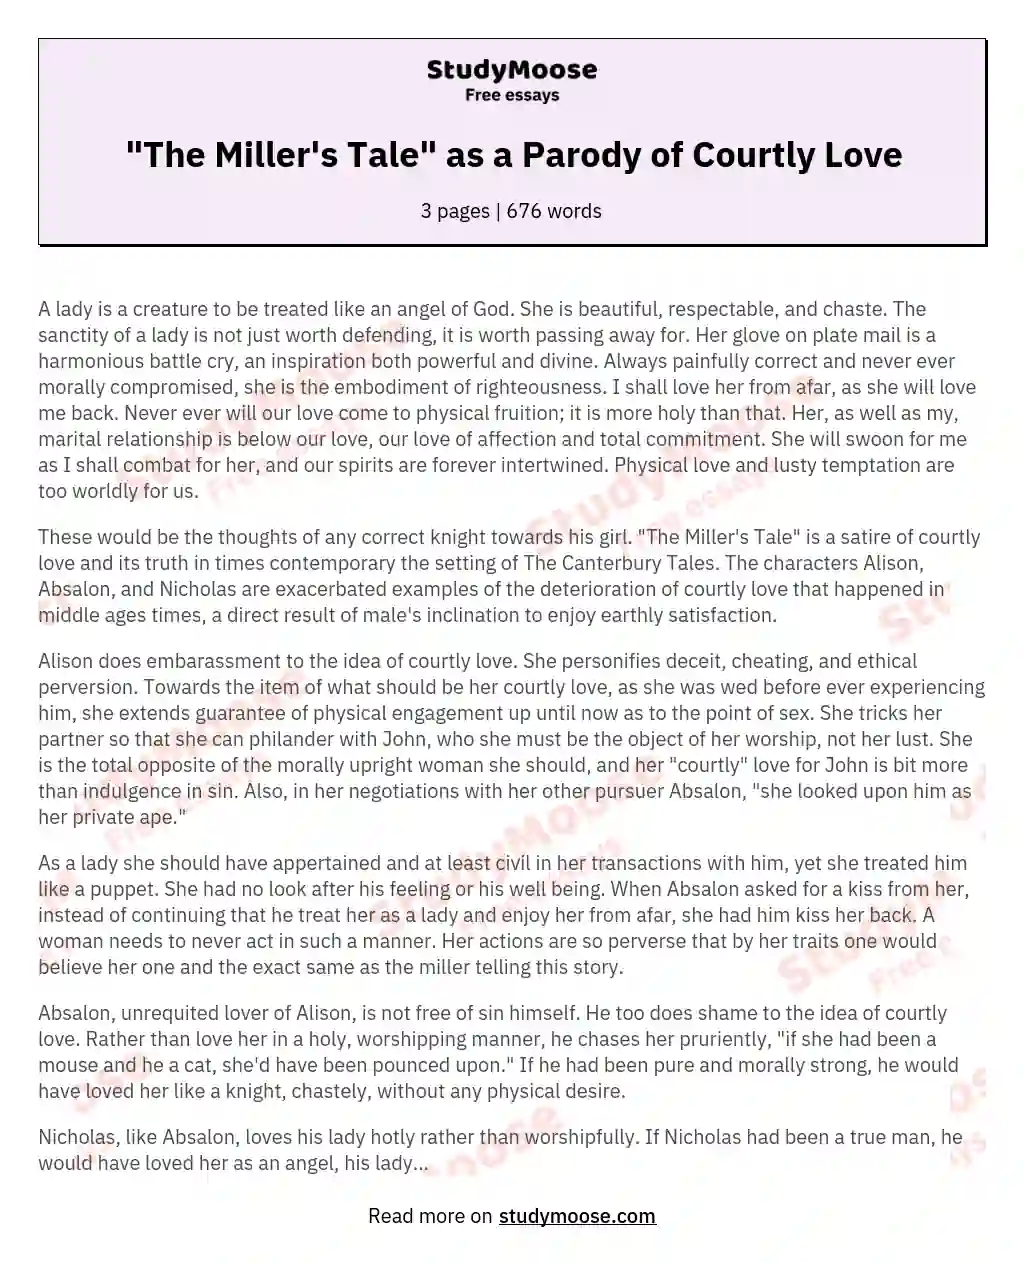 "The Miller's Tale" as a Parody of Courtly Love